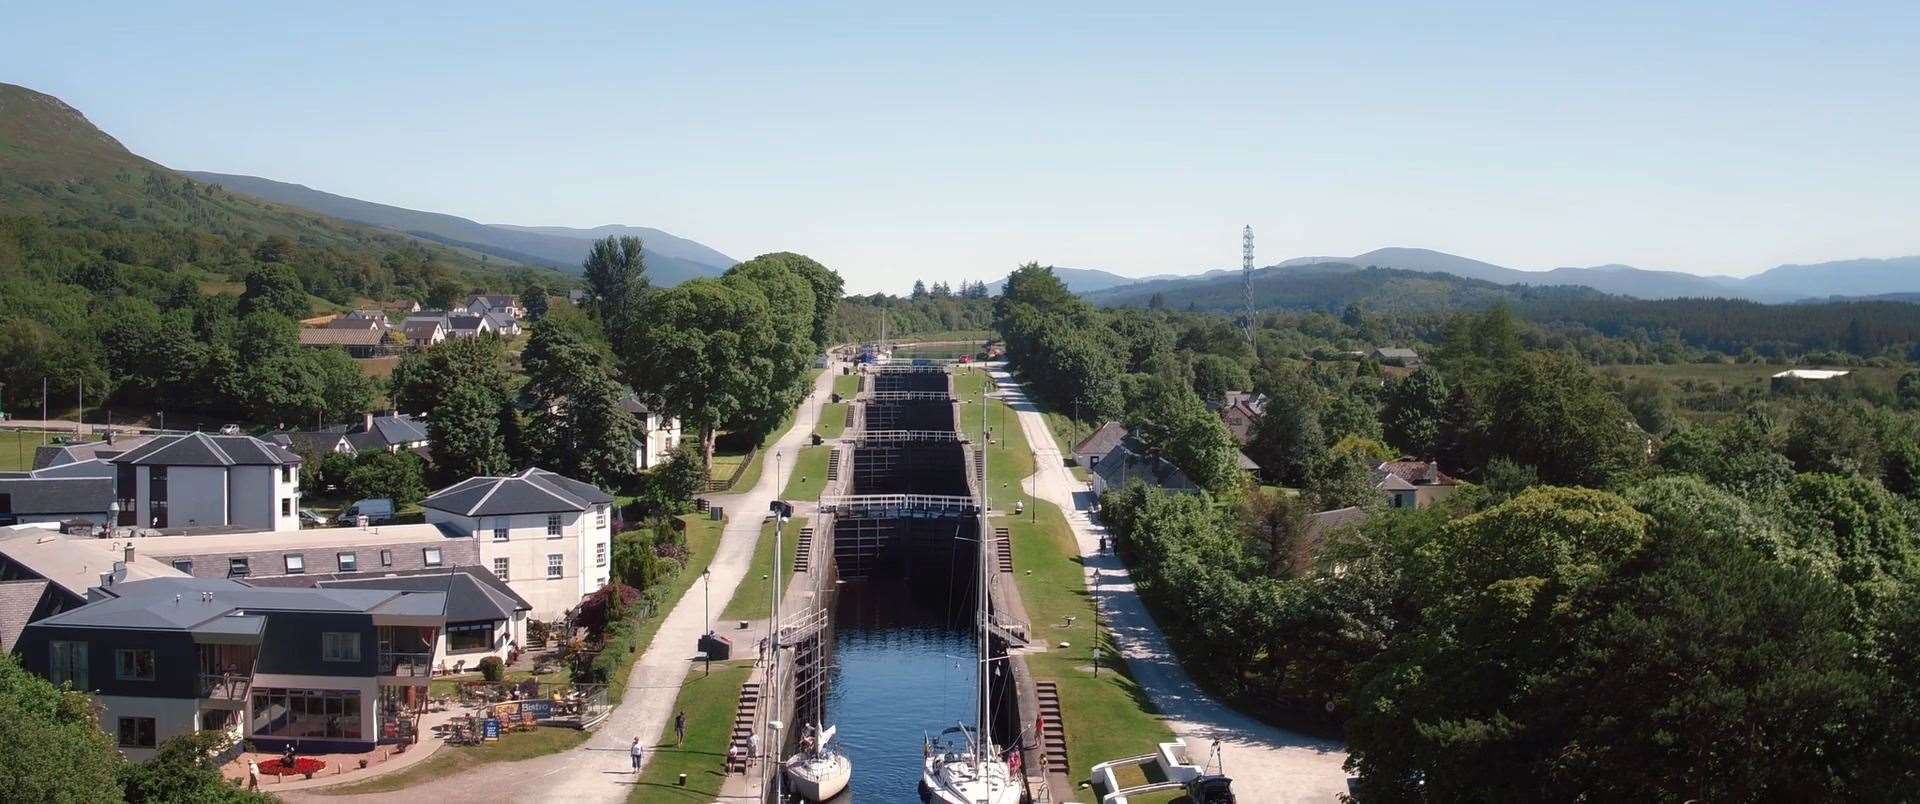 Neptune's Staircase at Corpach on the Caledonian Canal. Picture: Scottish Canals.